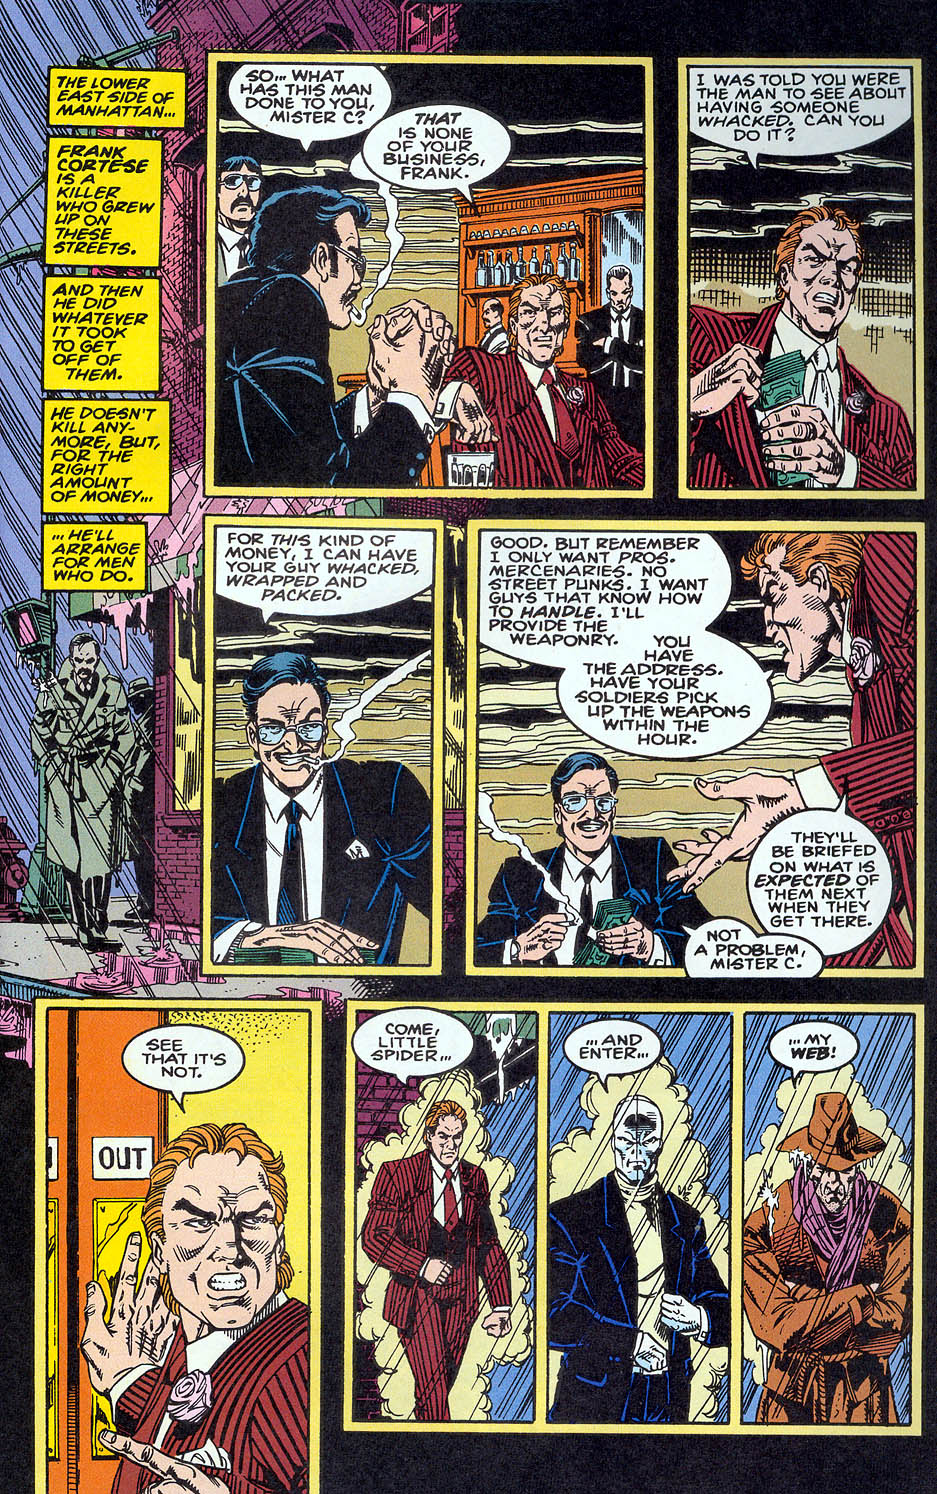 Spider-Man (1990) 45_-_The_Dream_Before Page 10